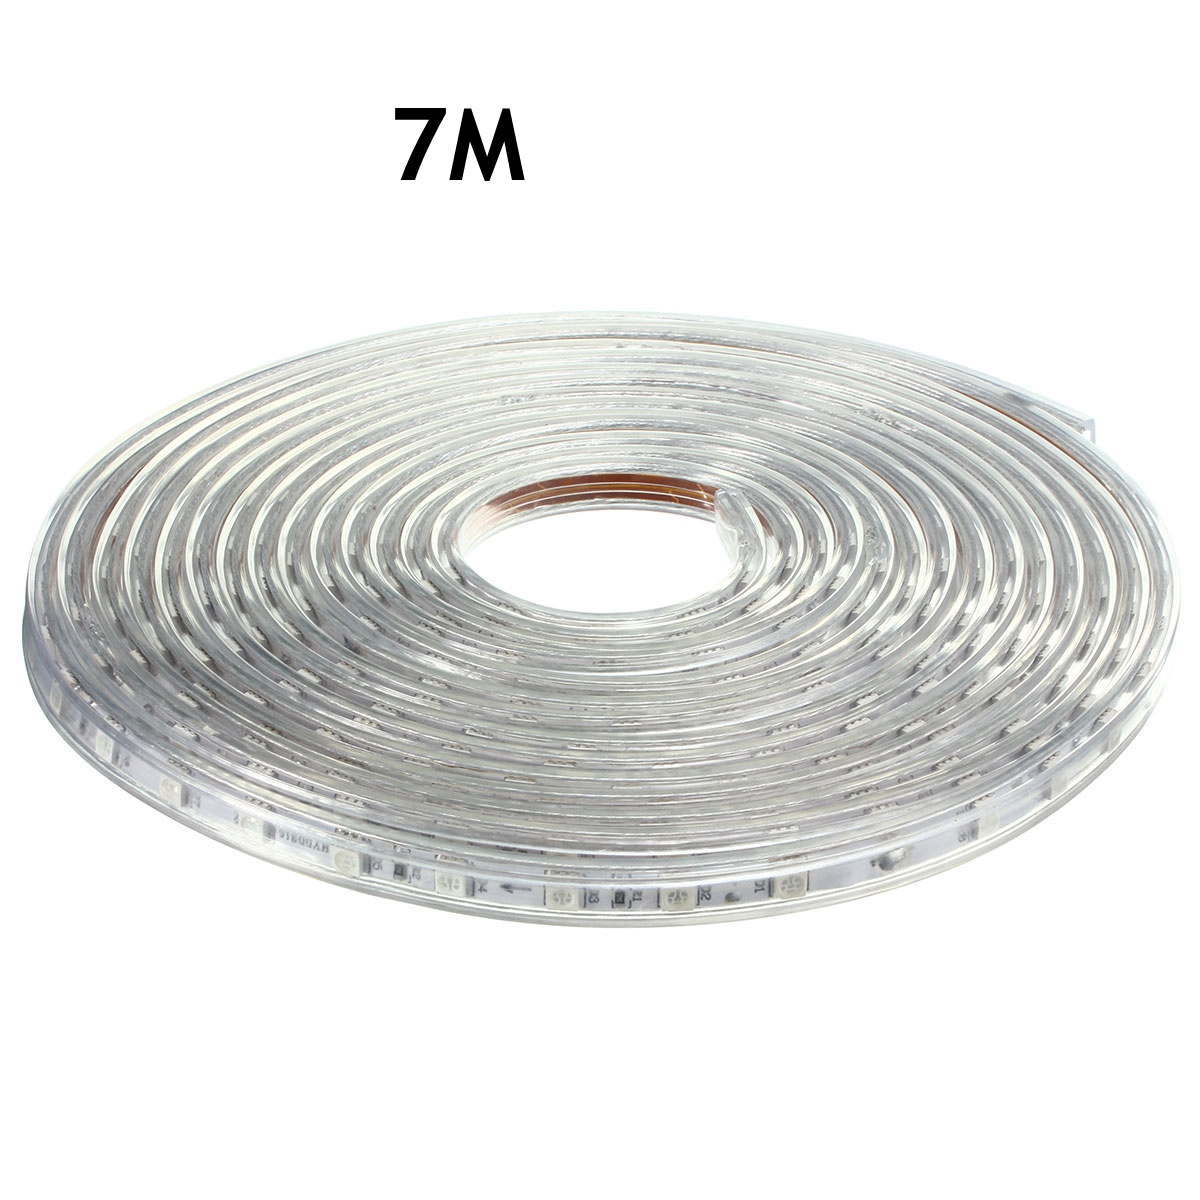 220V-7M-5050-LED-SMD-Outdoor-Waterproof-Flexible-Tape-Rope-Strip-Light-Xmas-1066363-2